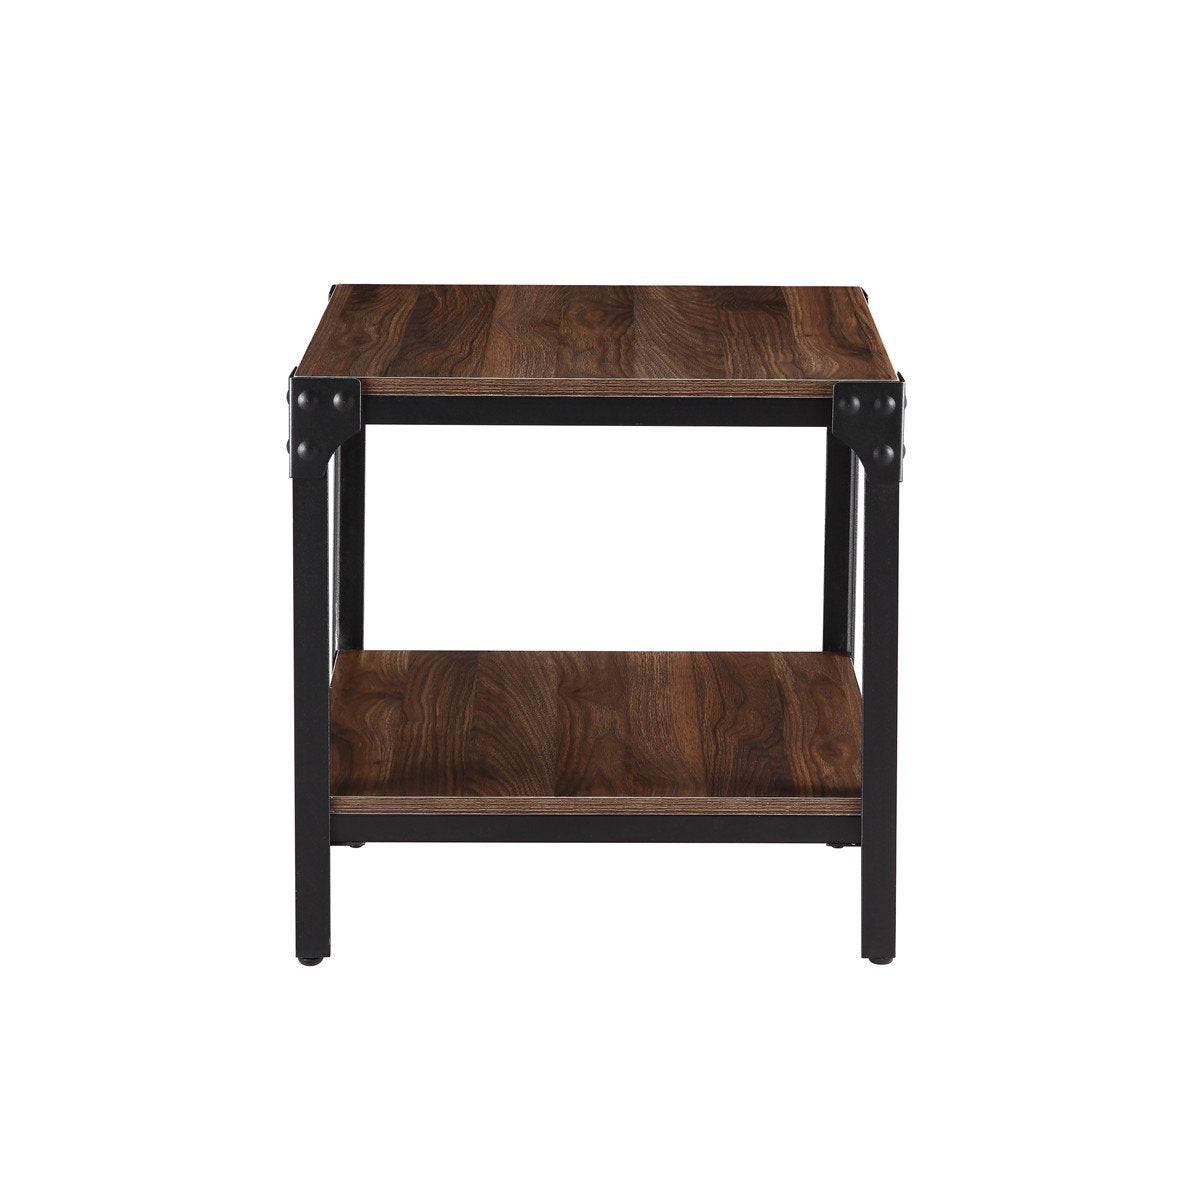 Rustic Farmhouse Square Wood Side End Accent Table Living Room